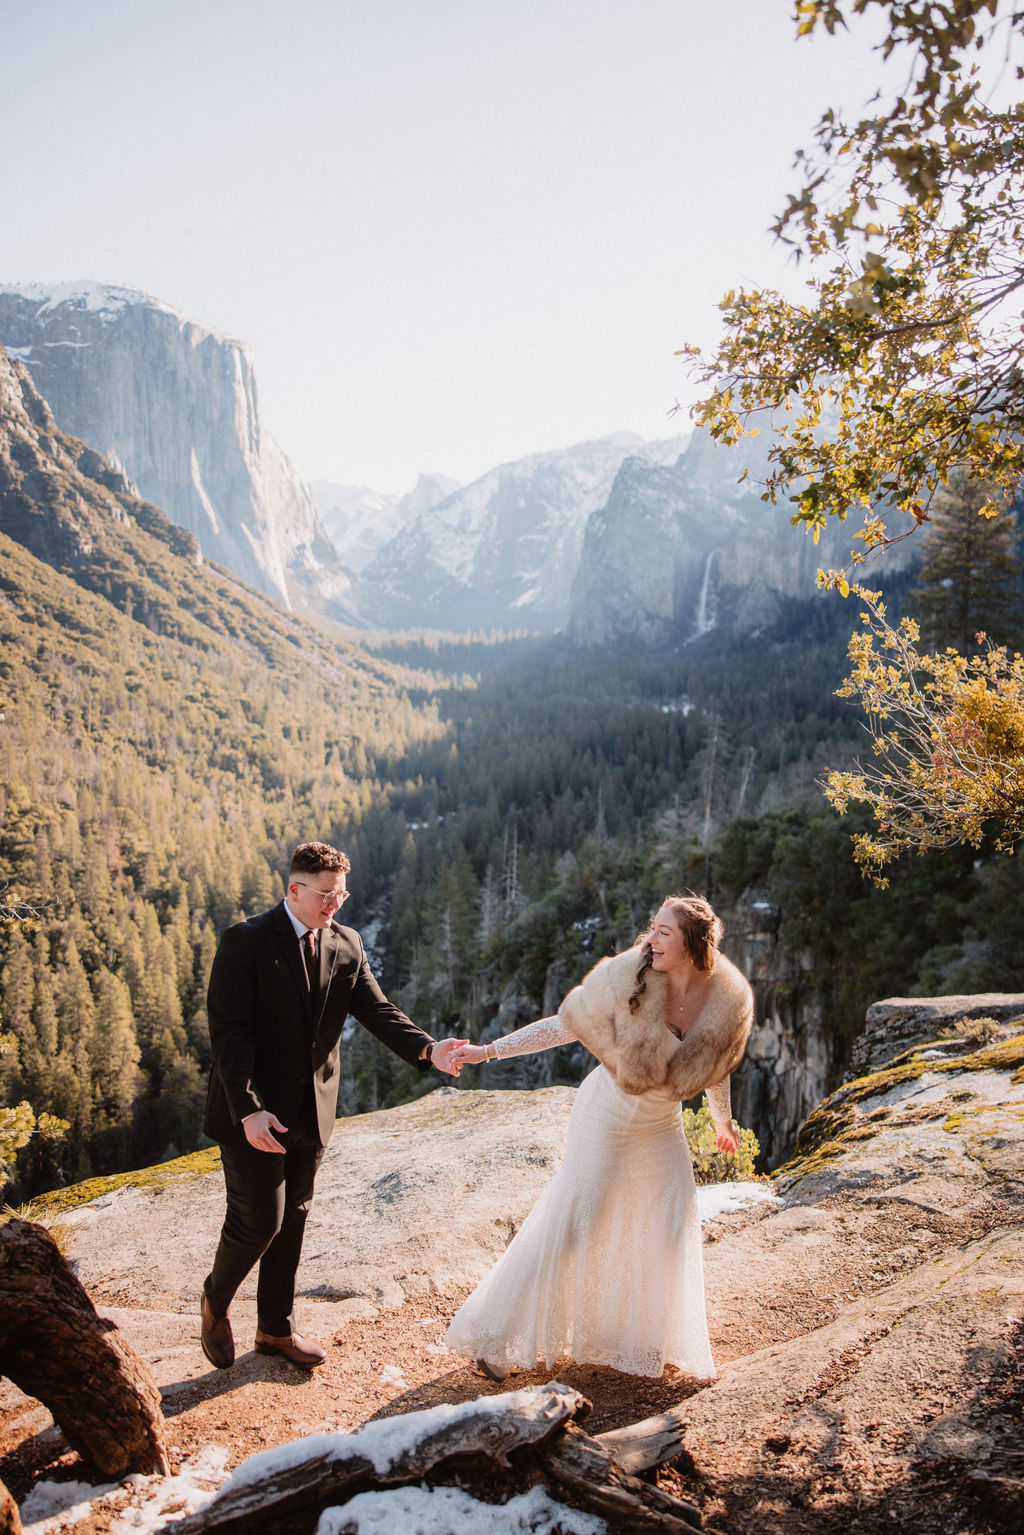 A bride and groom holding hands in a mountainous landscape, with the bride looking at the groom and the groom looking at the scenery.